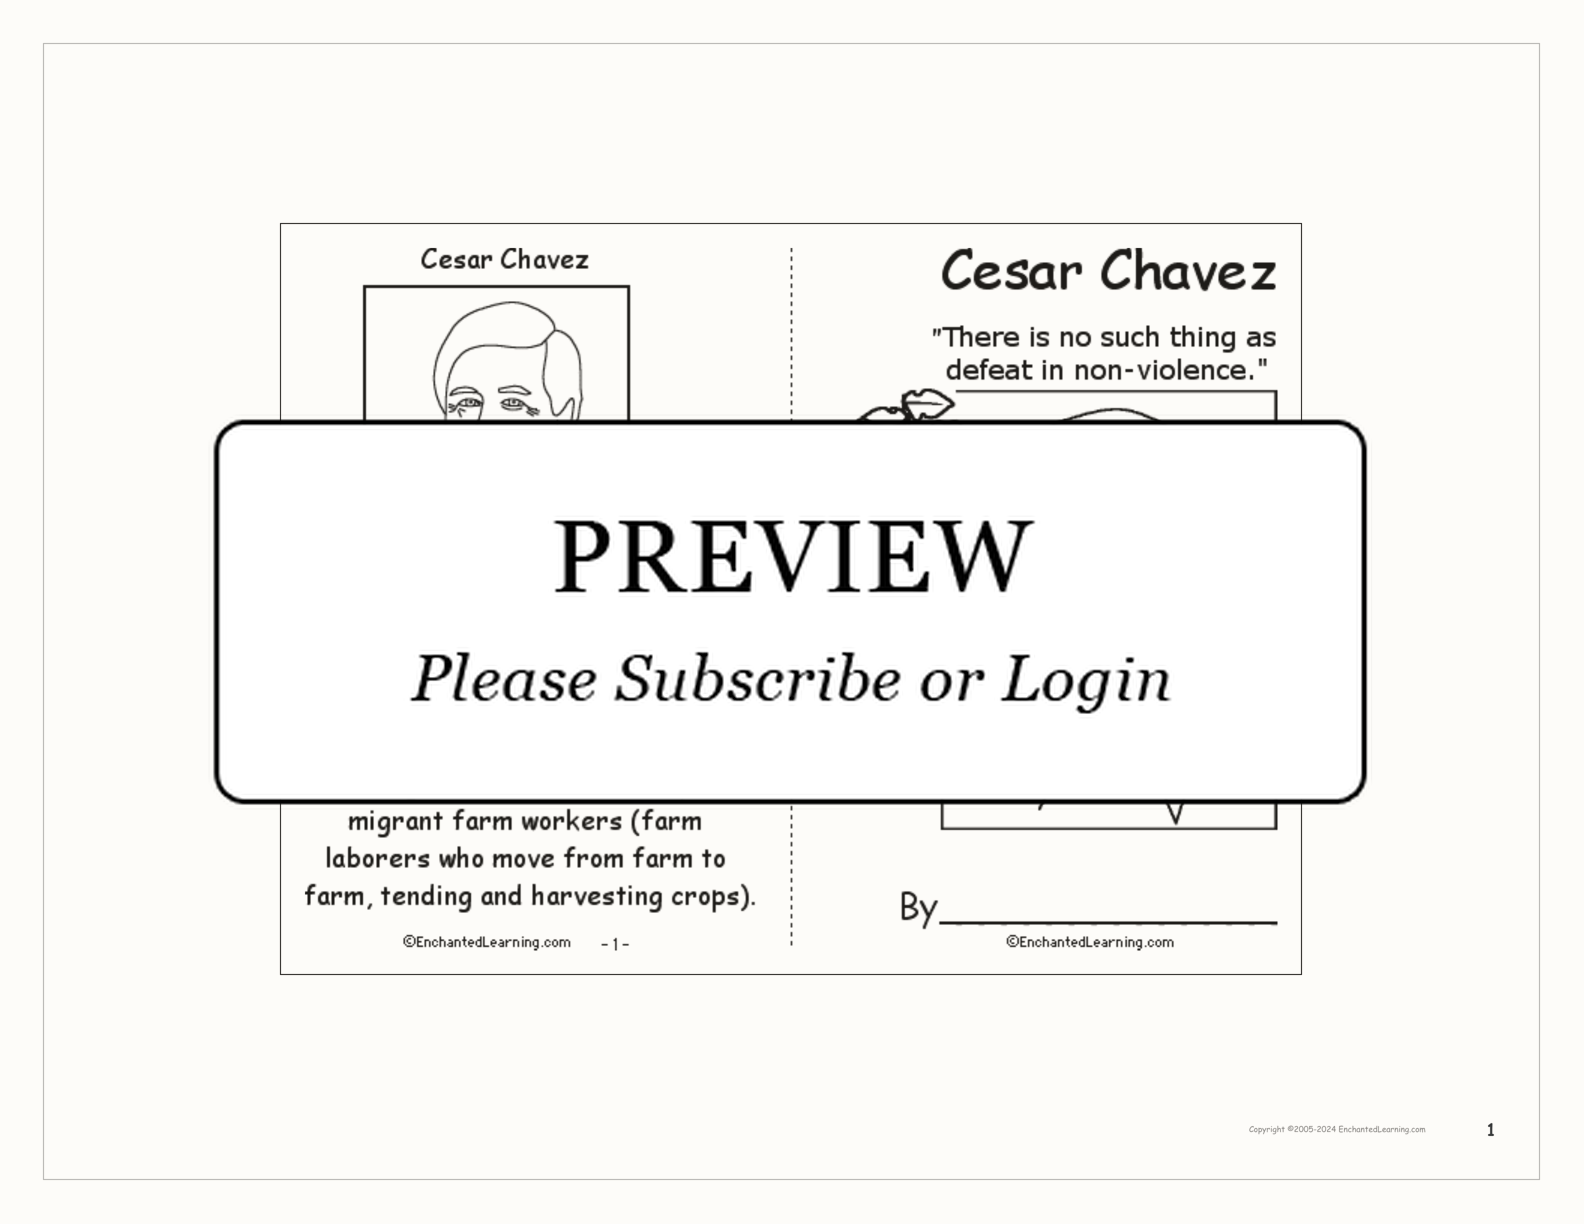 Cesar Chavez Book interactive worksheet page 1